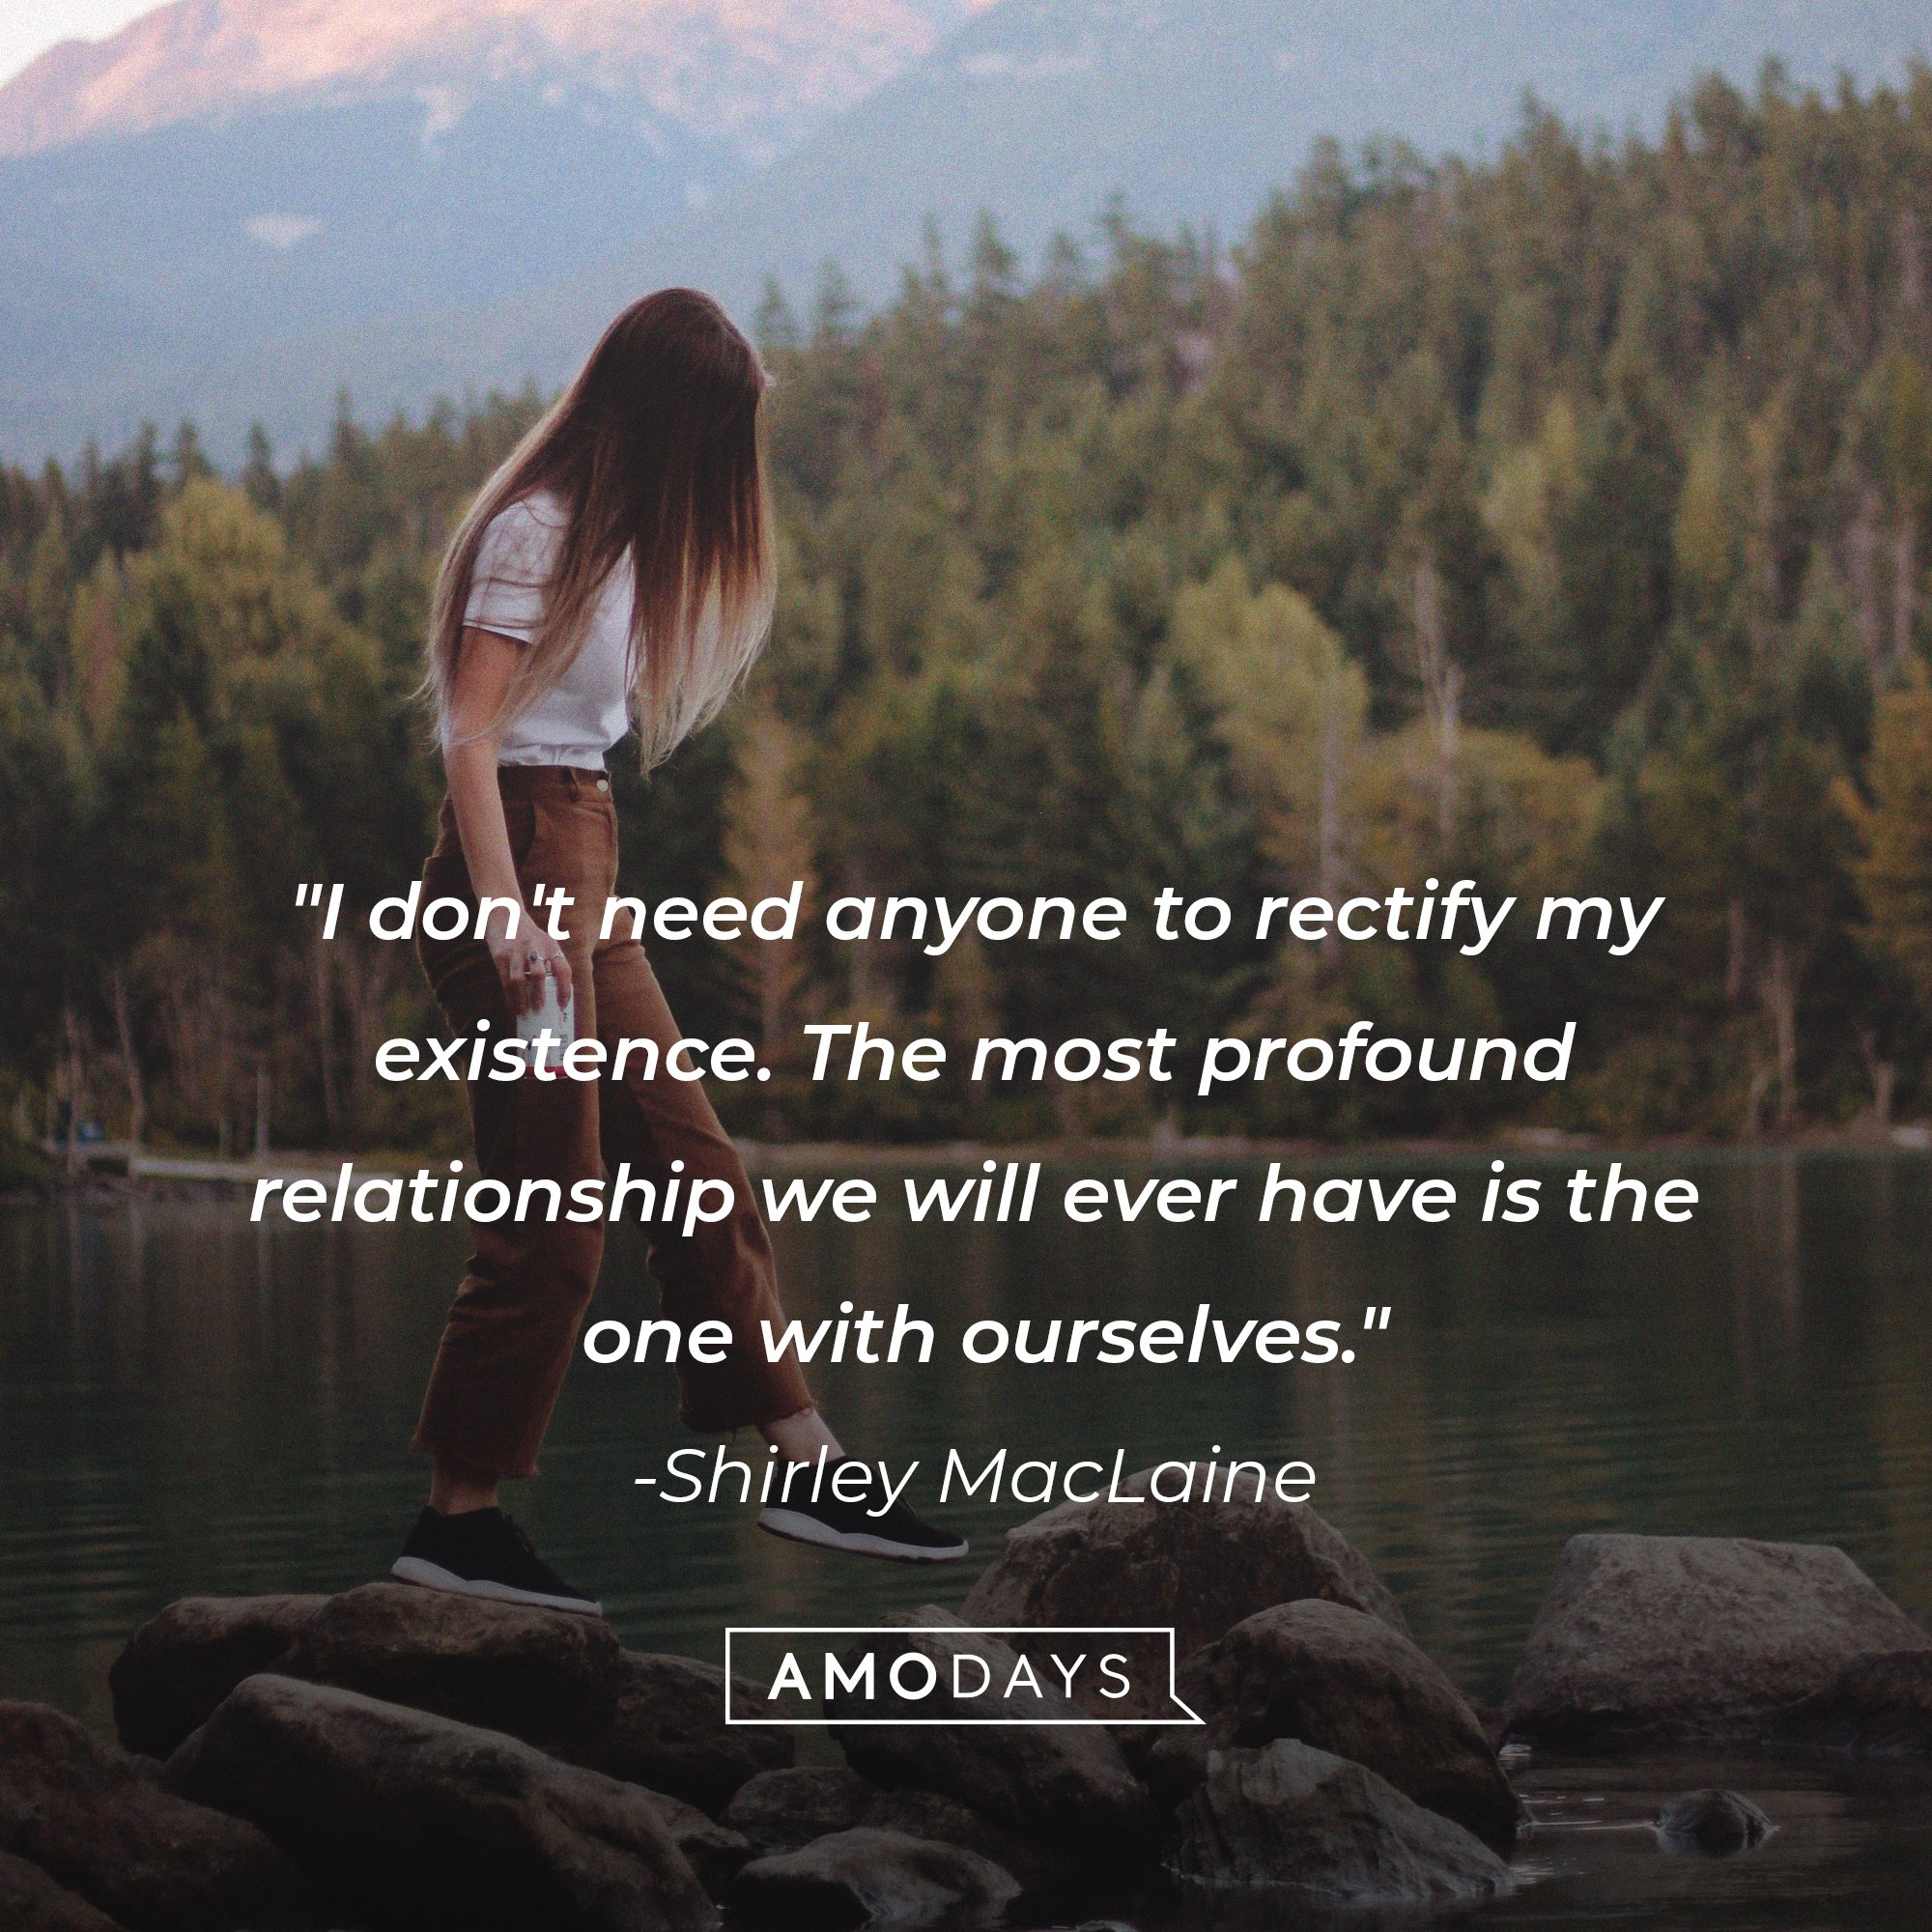 Shirley MacLaine's quote: "I don't need anyone to rectify my existence. The most profound relationship we will ever have is the one with ourselves." | Image: AmoDays